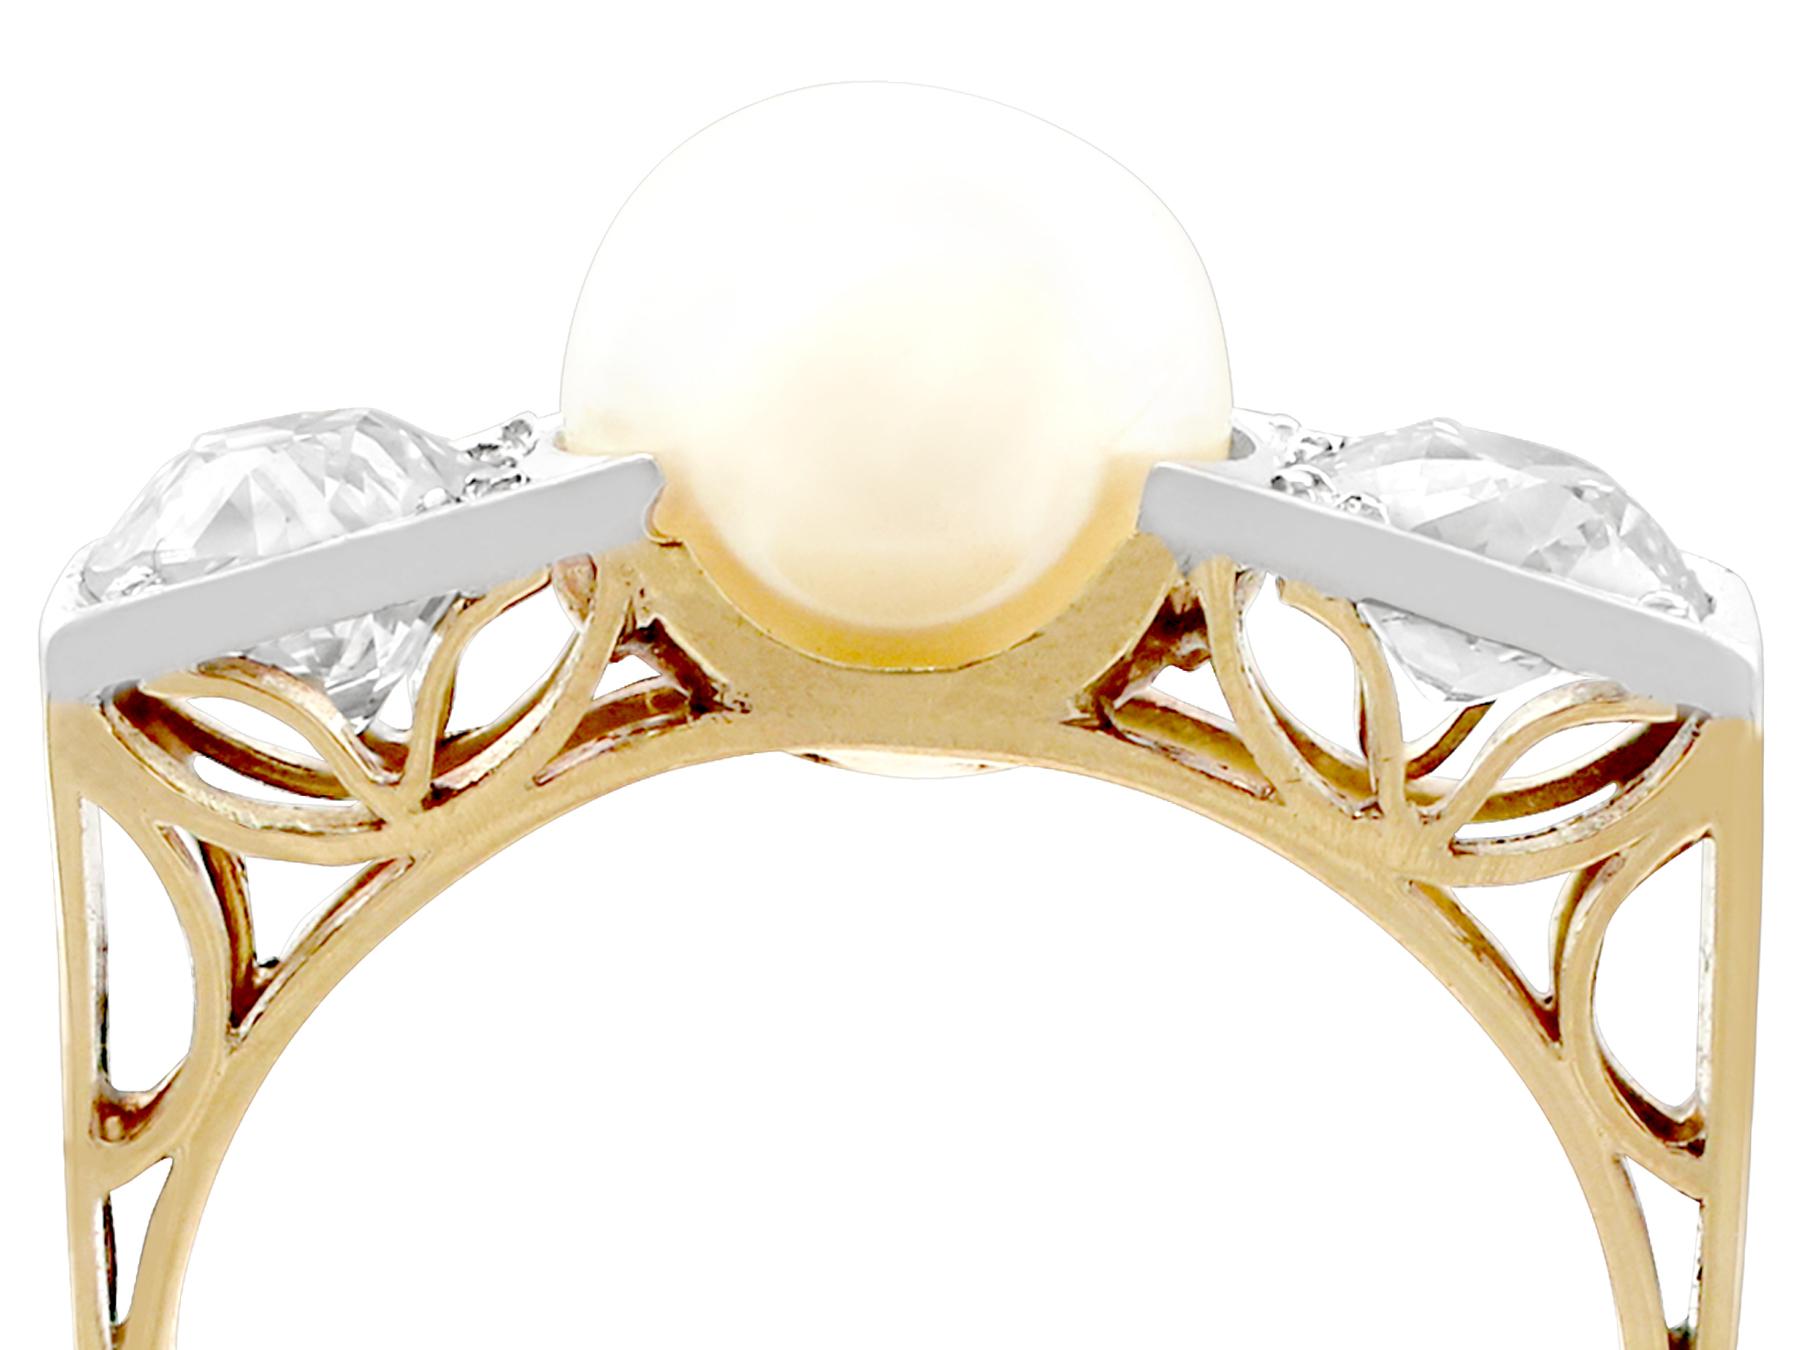 A fine and impressive pearl and 1.15 carat diamond, 18 karat yellow gold, platinum set dress ring in the Art Deco style; part of our vintage pearl jewelry collections.

This fine vintage pearl and diamond dress ring has been crafted in 18k yellow